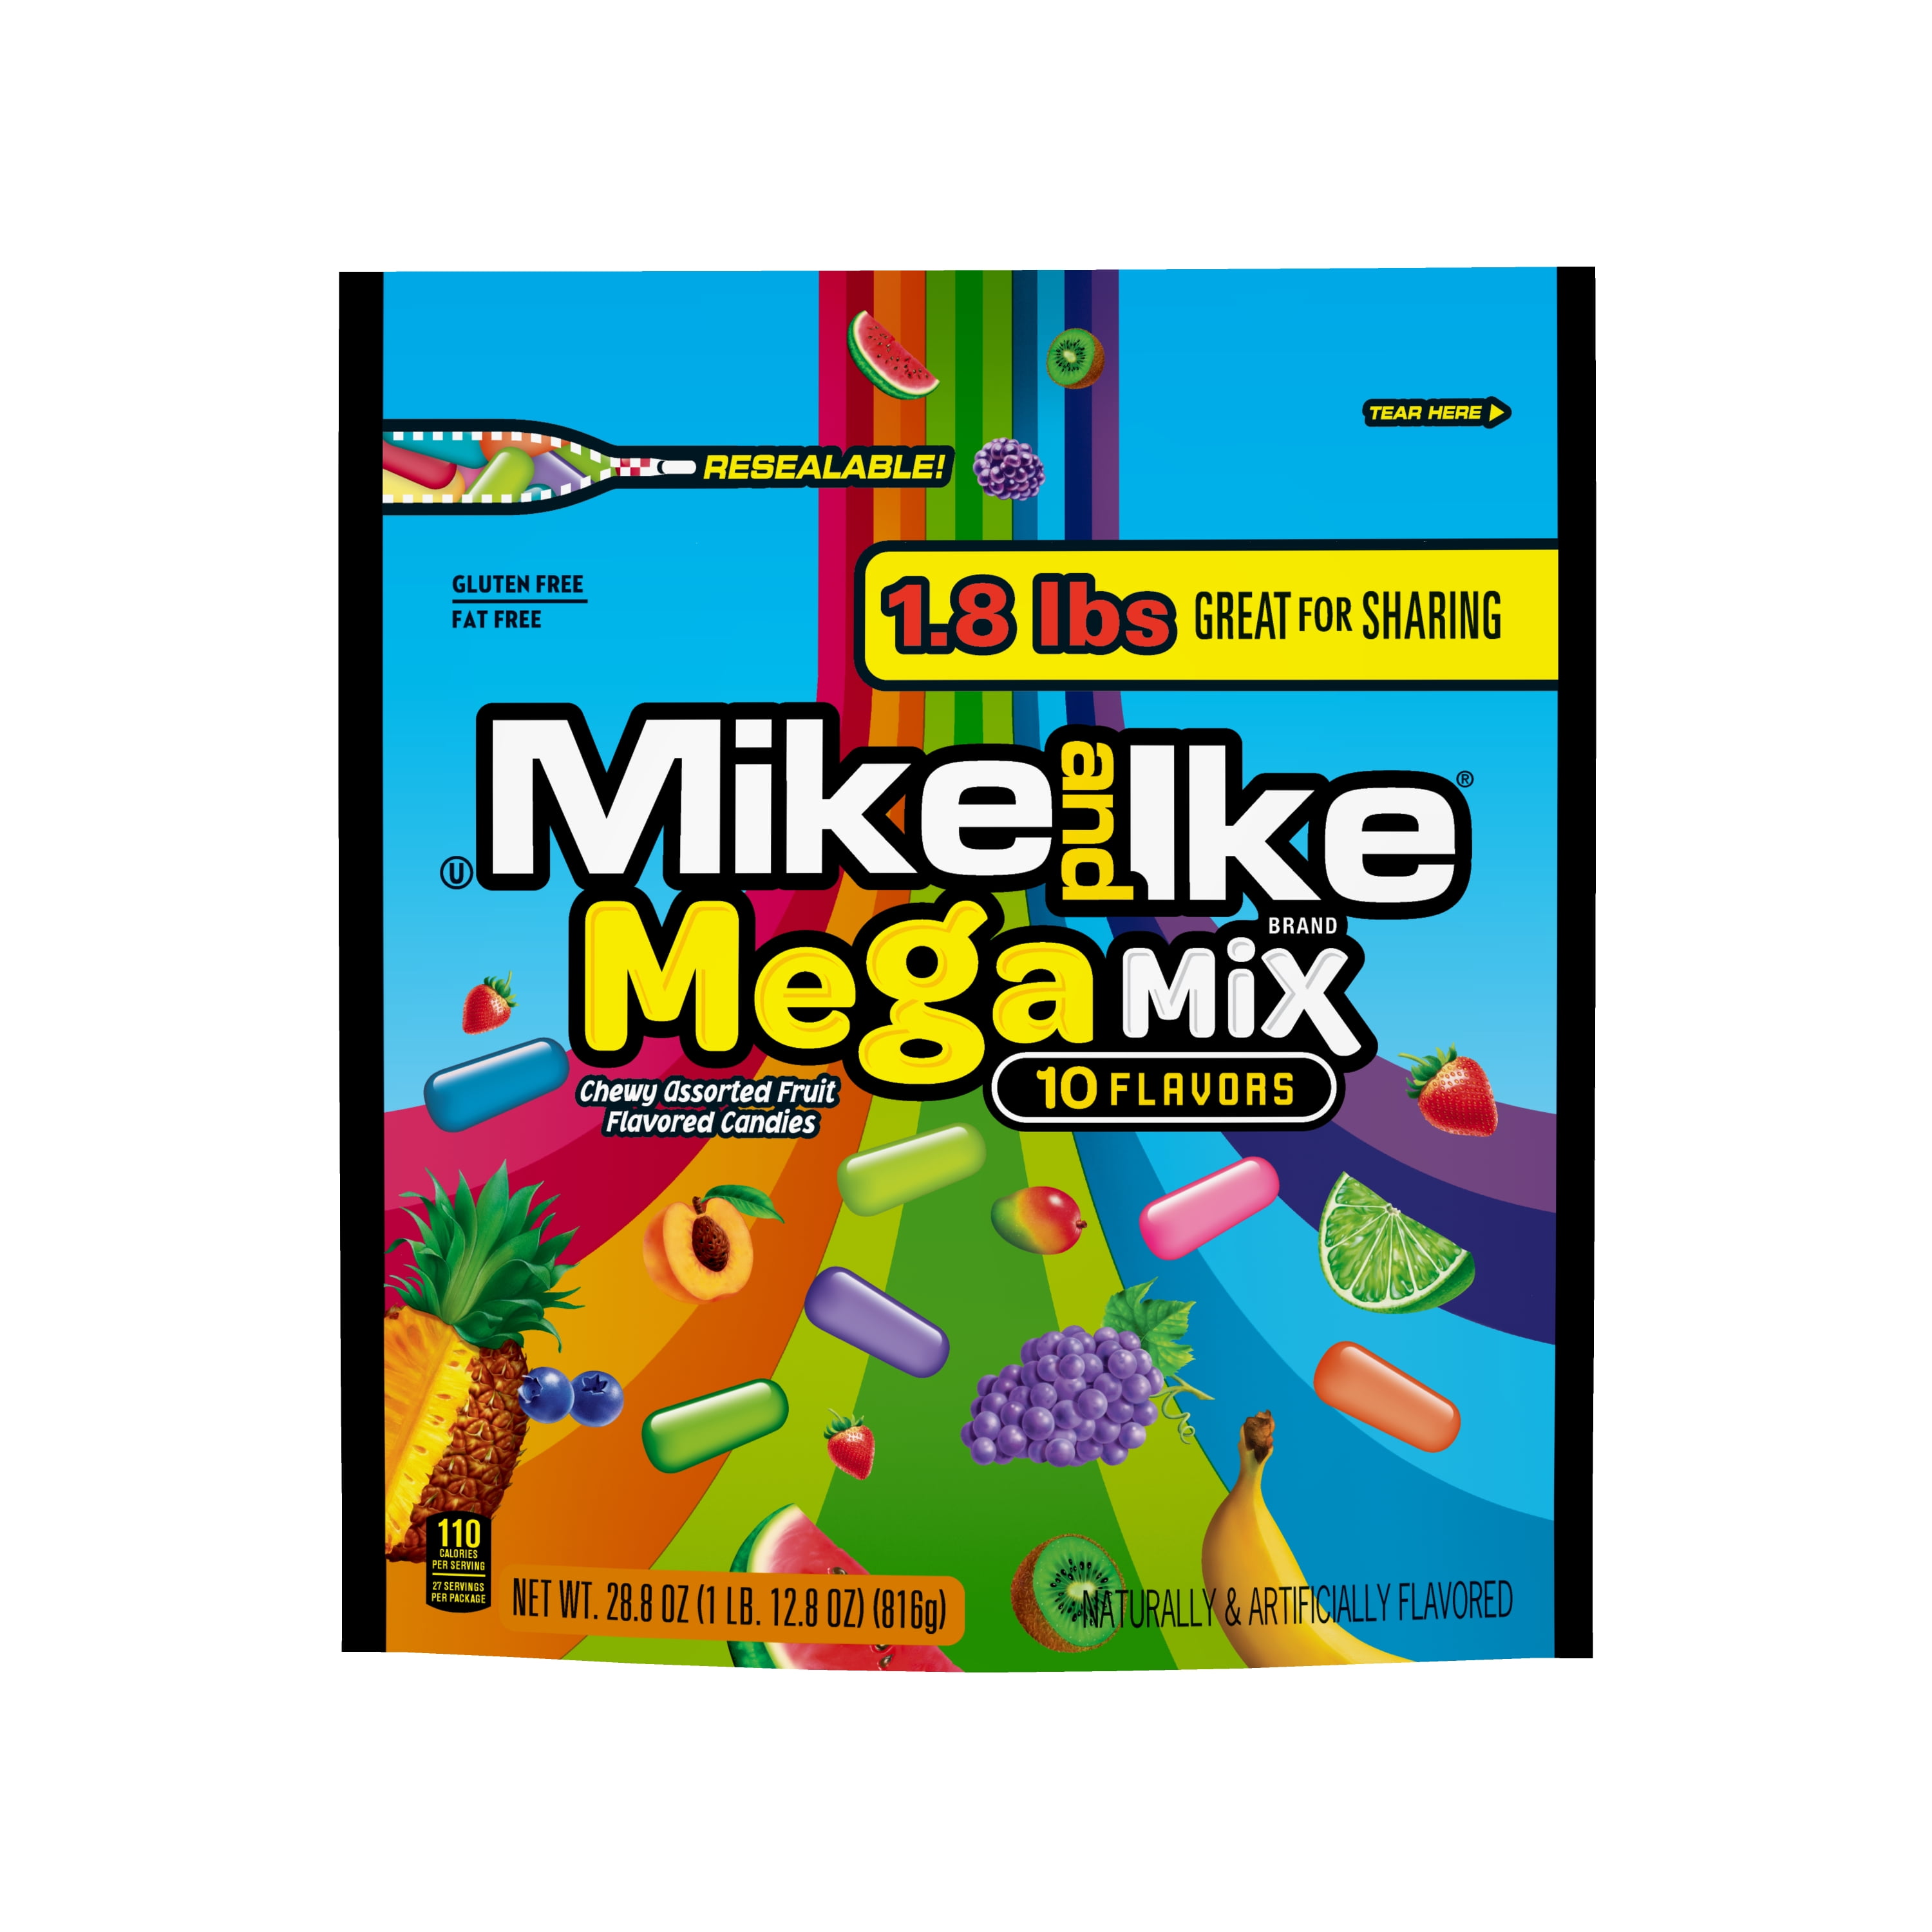 Mike and Ike Mega Mix Chewy Candy, 28.8 ounce Stand Up Bag, 1 count